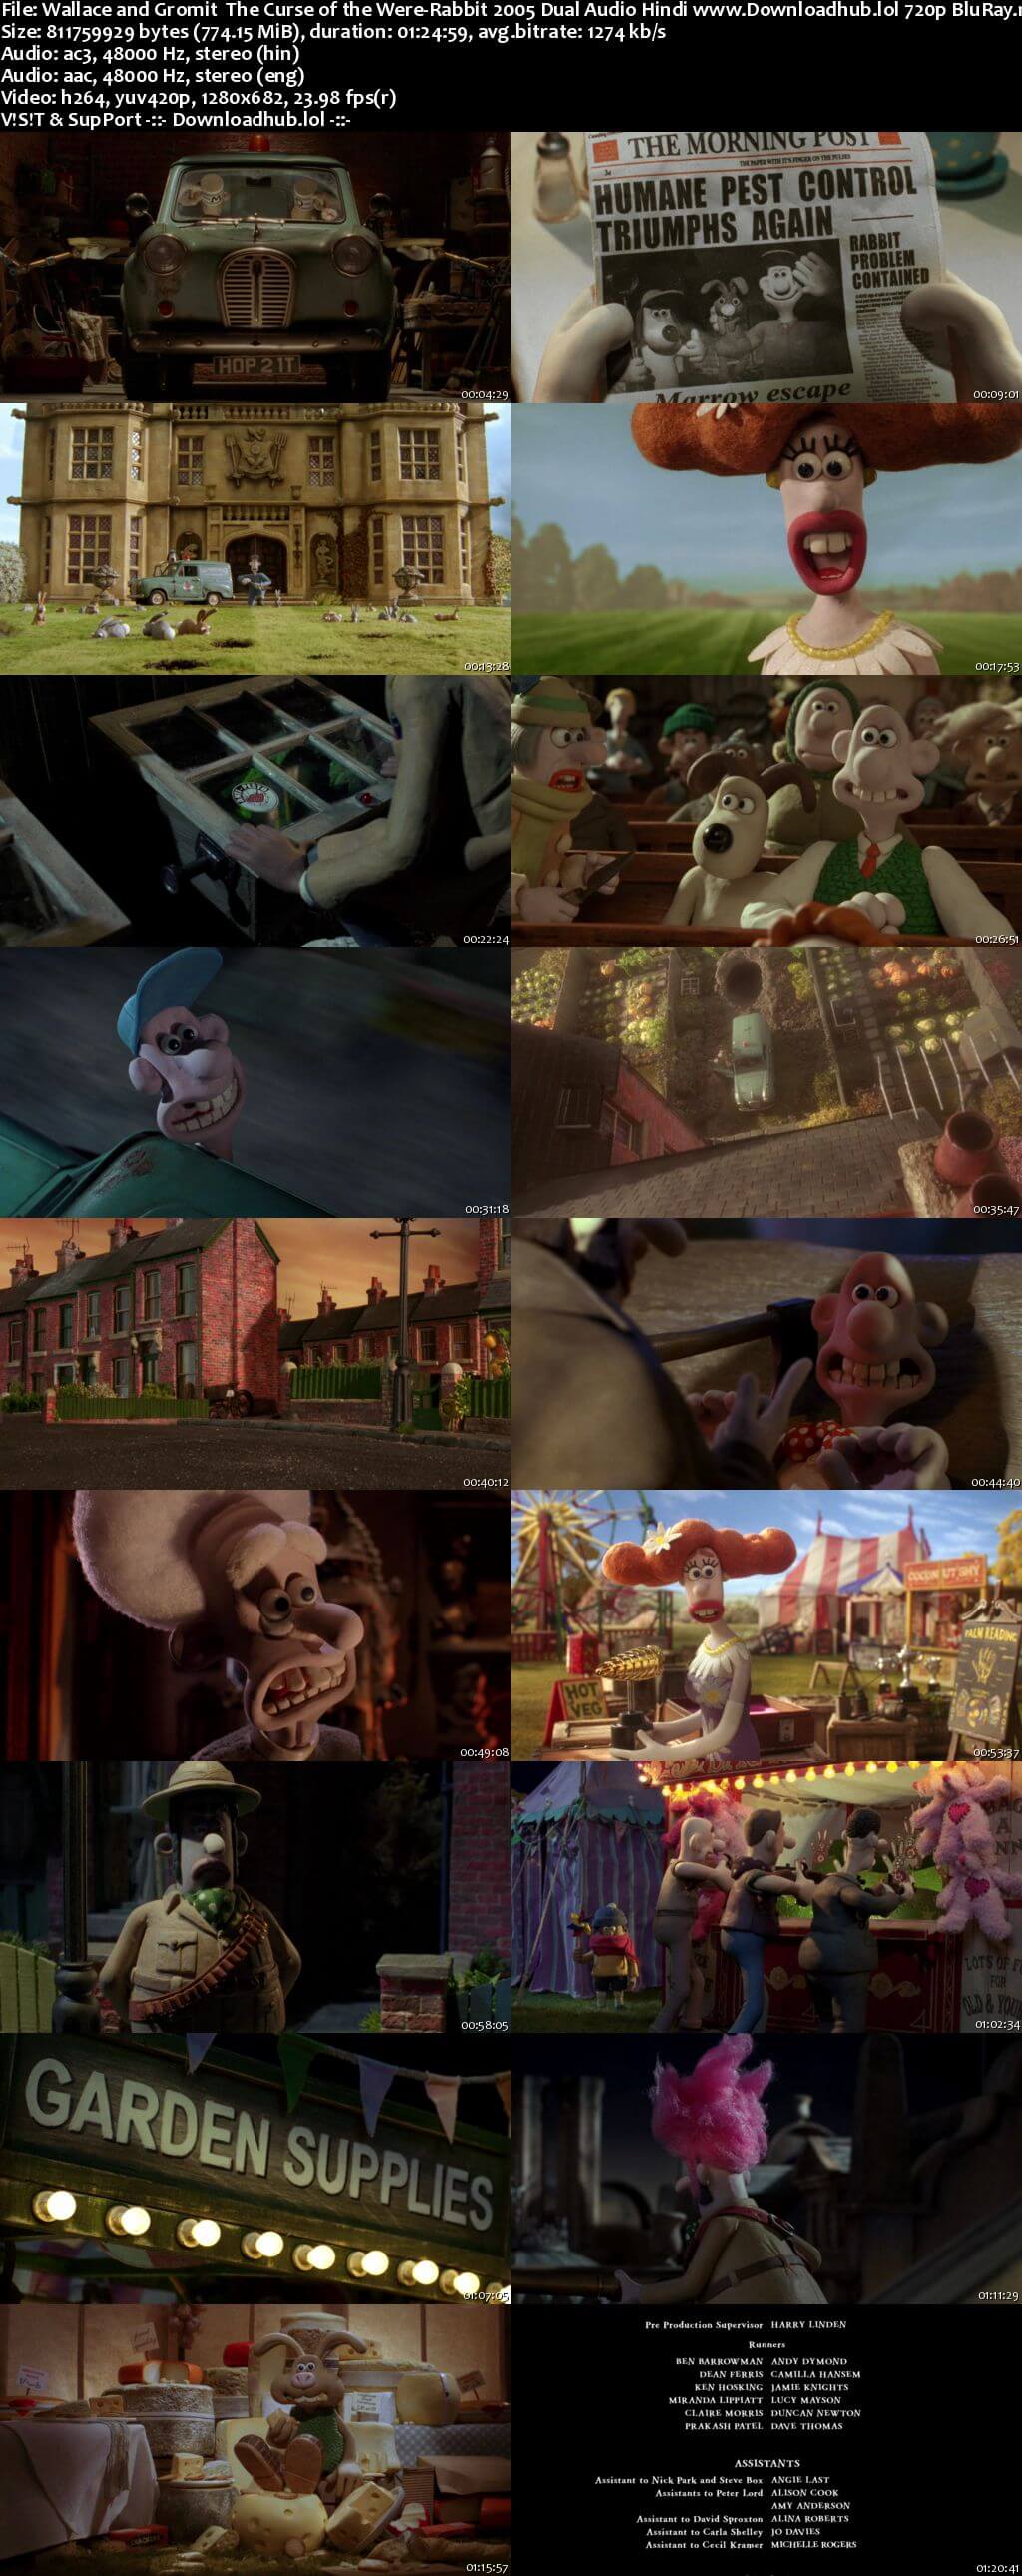 Wallace And Gromit The Curse of the Were Rabbit 2005 Hindi Dual Audio 720p BluRay ESubs